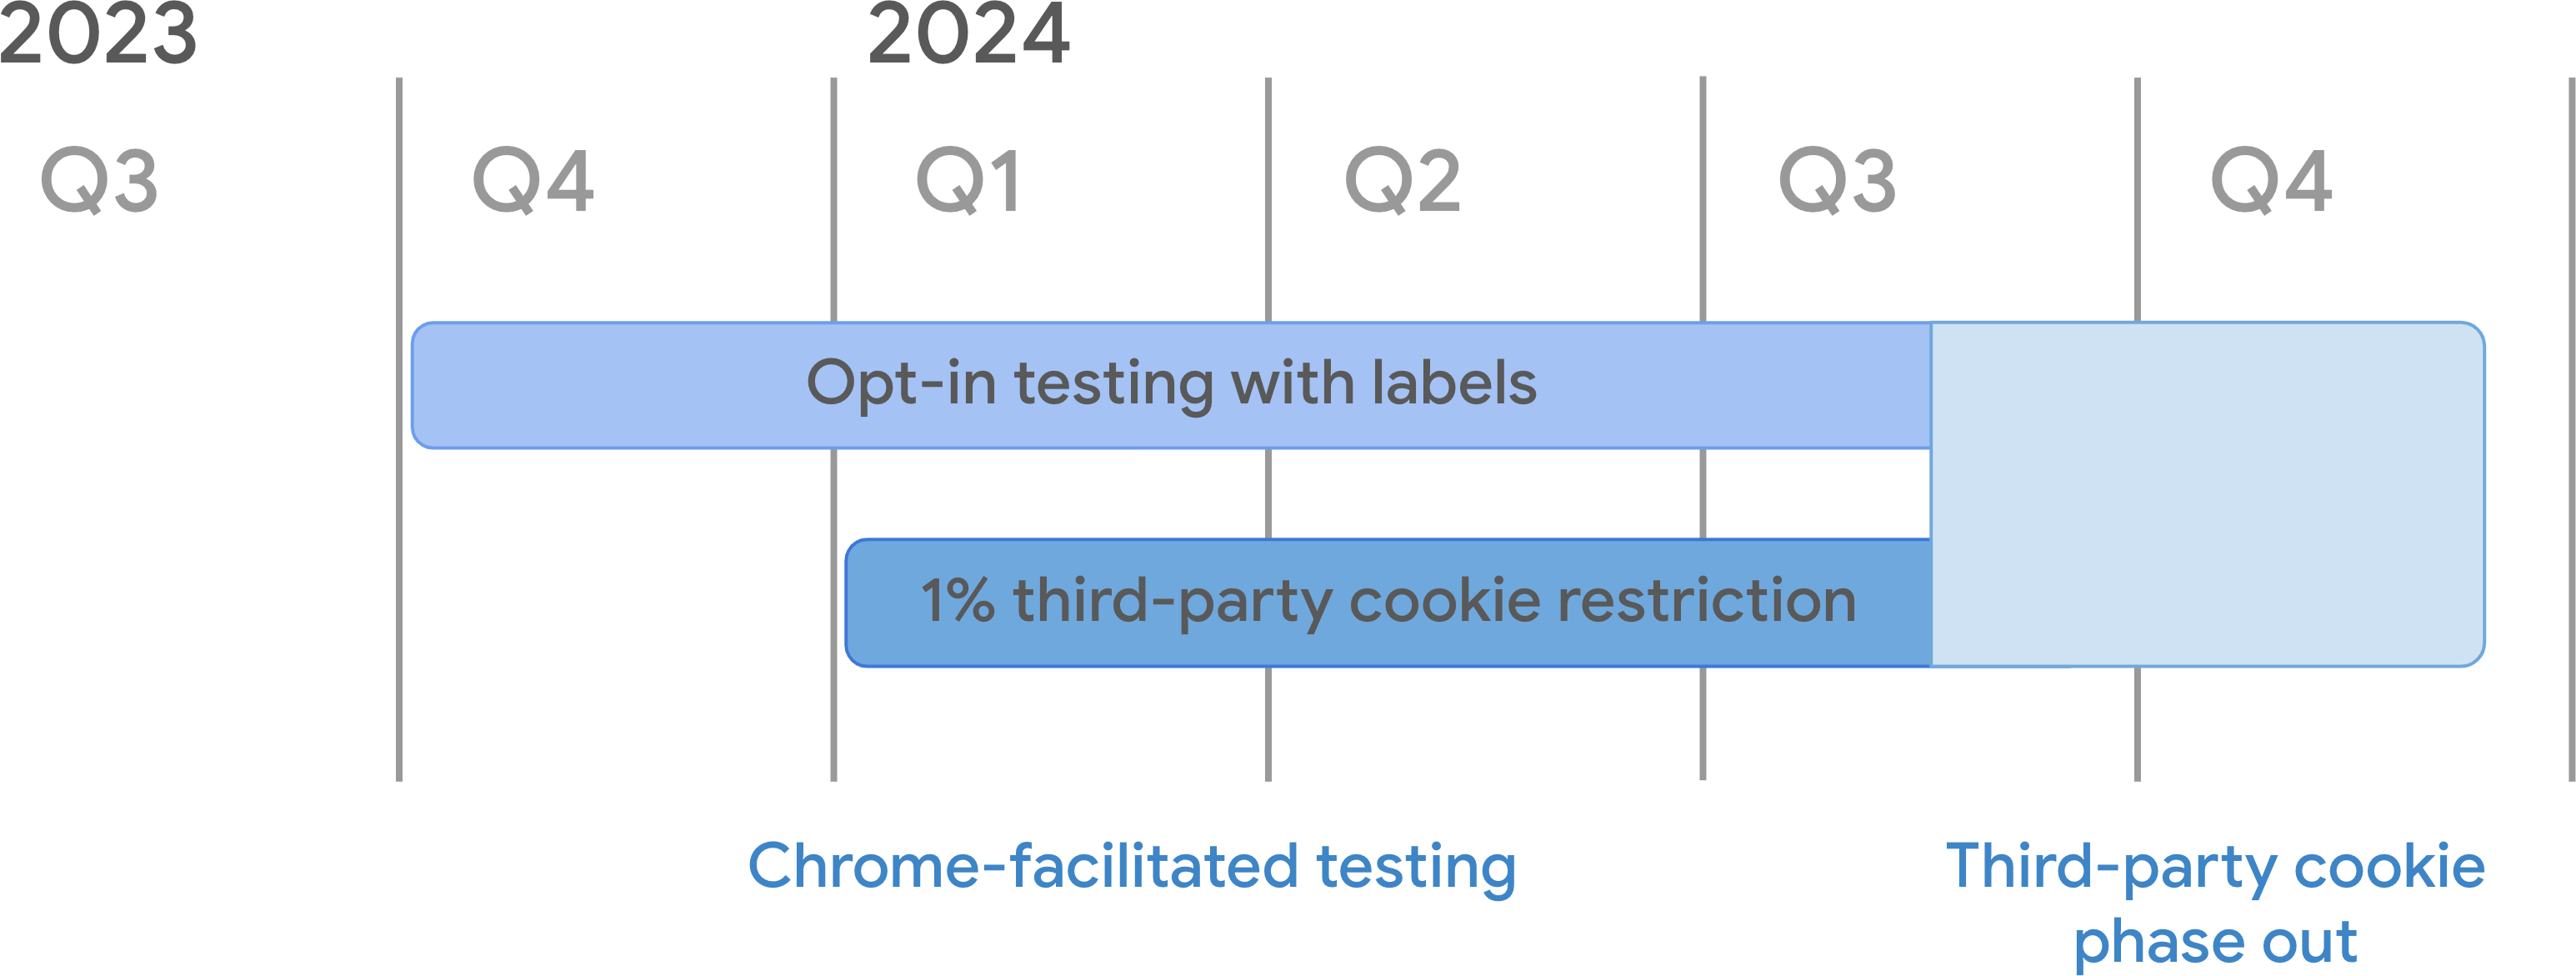 Timeline for third-party cookie deprecation. As part of Chrome-facilitated testing, the opt-in testing with labels mode started in Q4 2023 and the 1% 3PC deprecation mode from January 4th, 2024. Both continue through to mid-Q3 2024 when the third-party cookie phaseout starts.